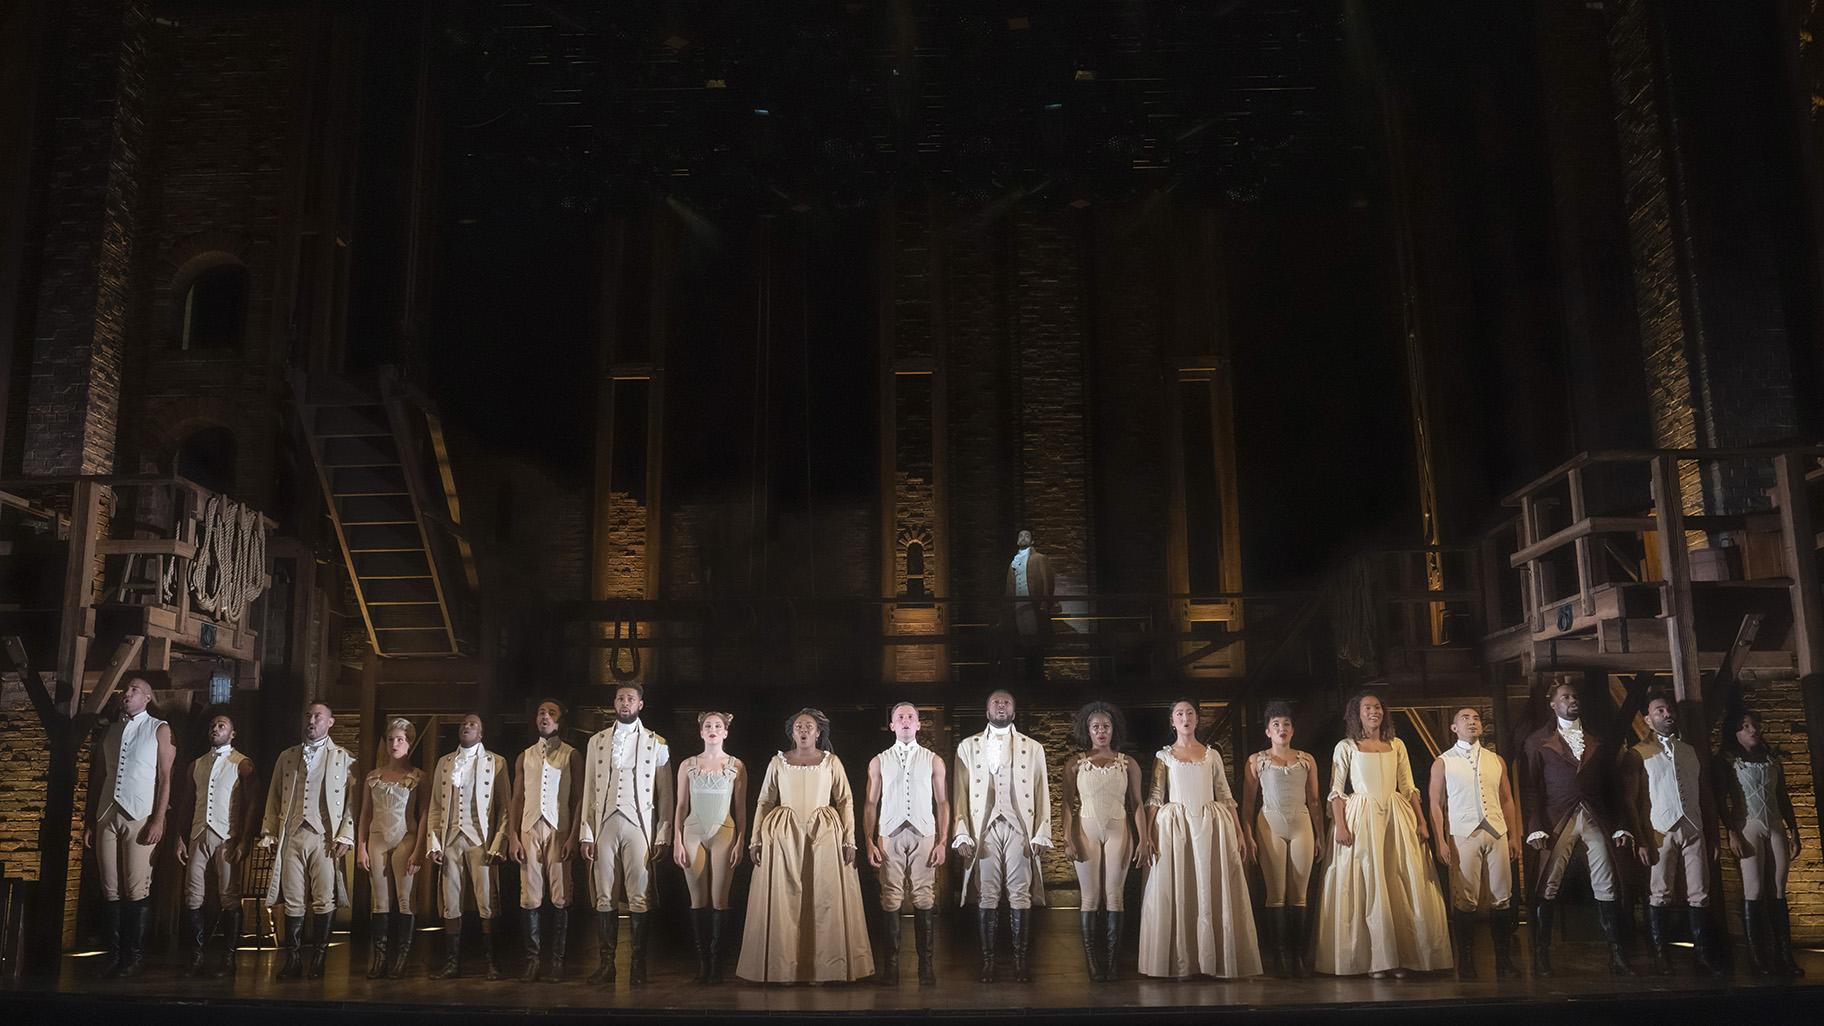 The cast of the touring company of “Hamilton” will perform at the Nederlander Theatre in Chicago. (Credit: Joan Marcus)